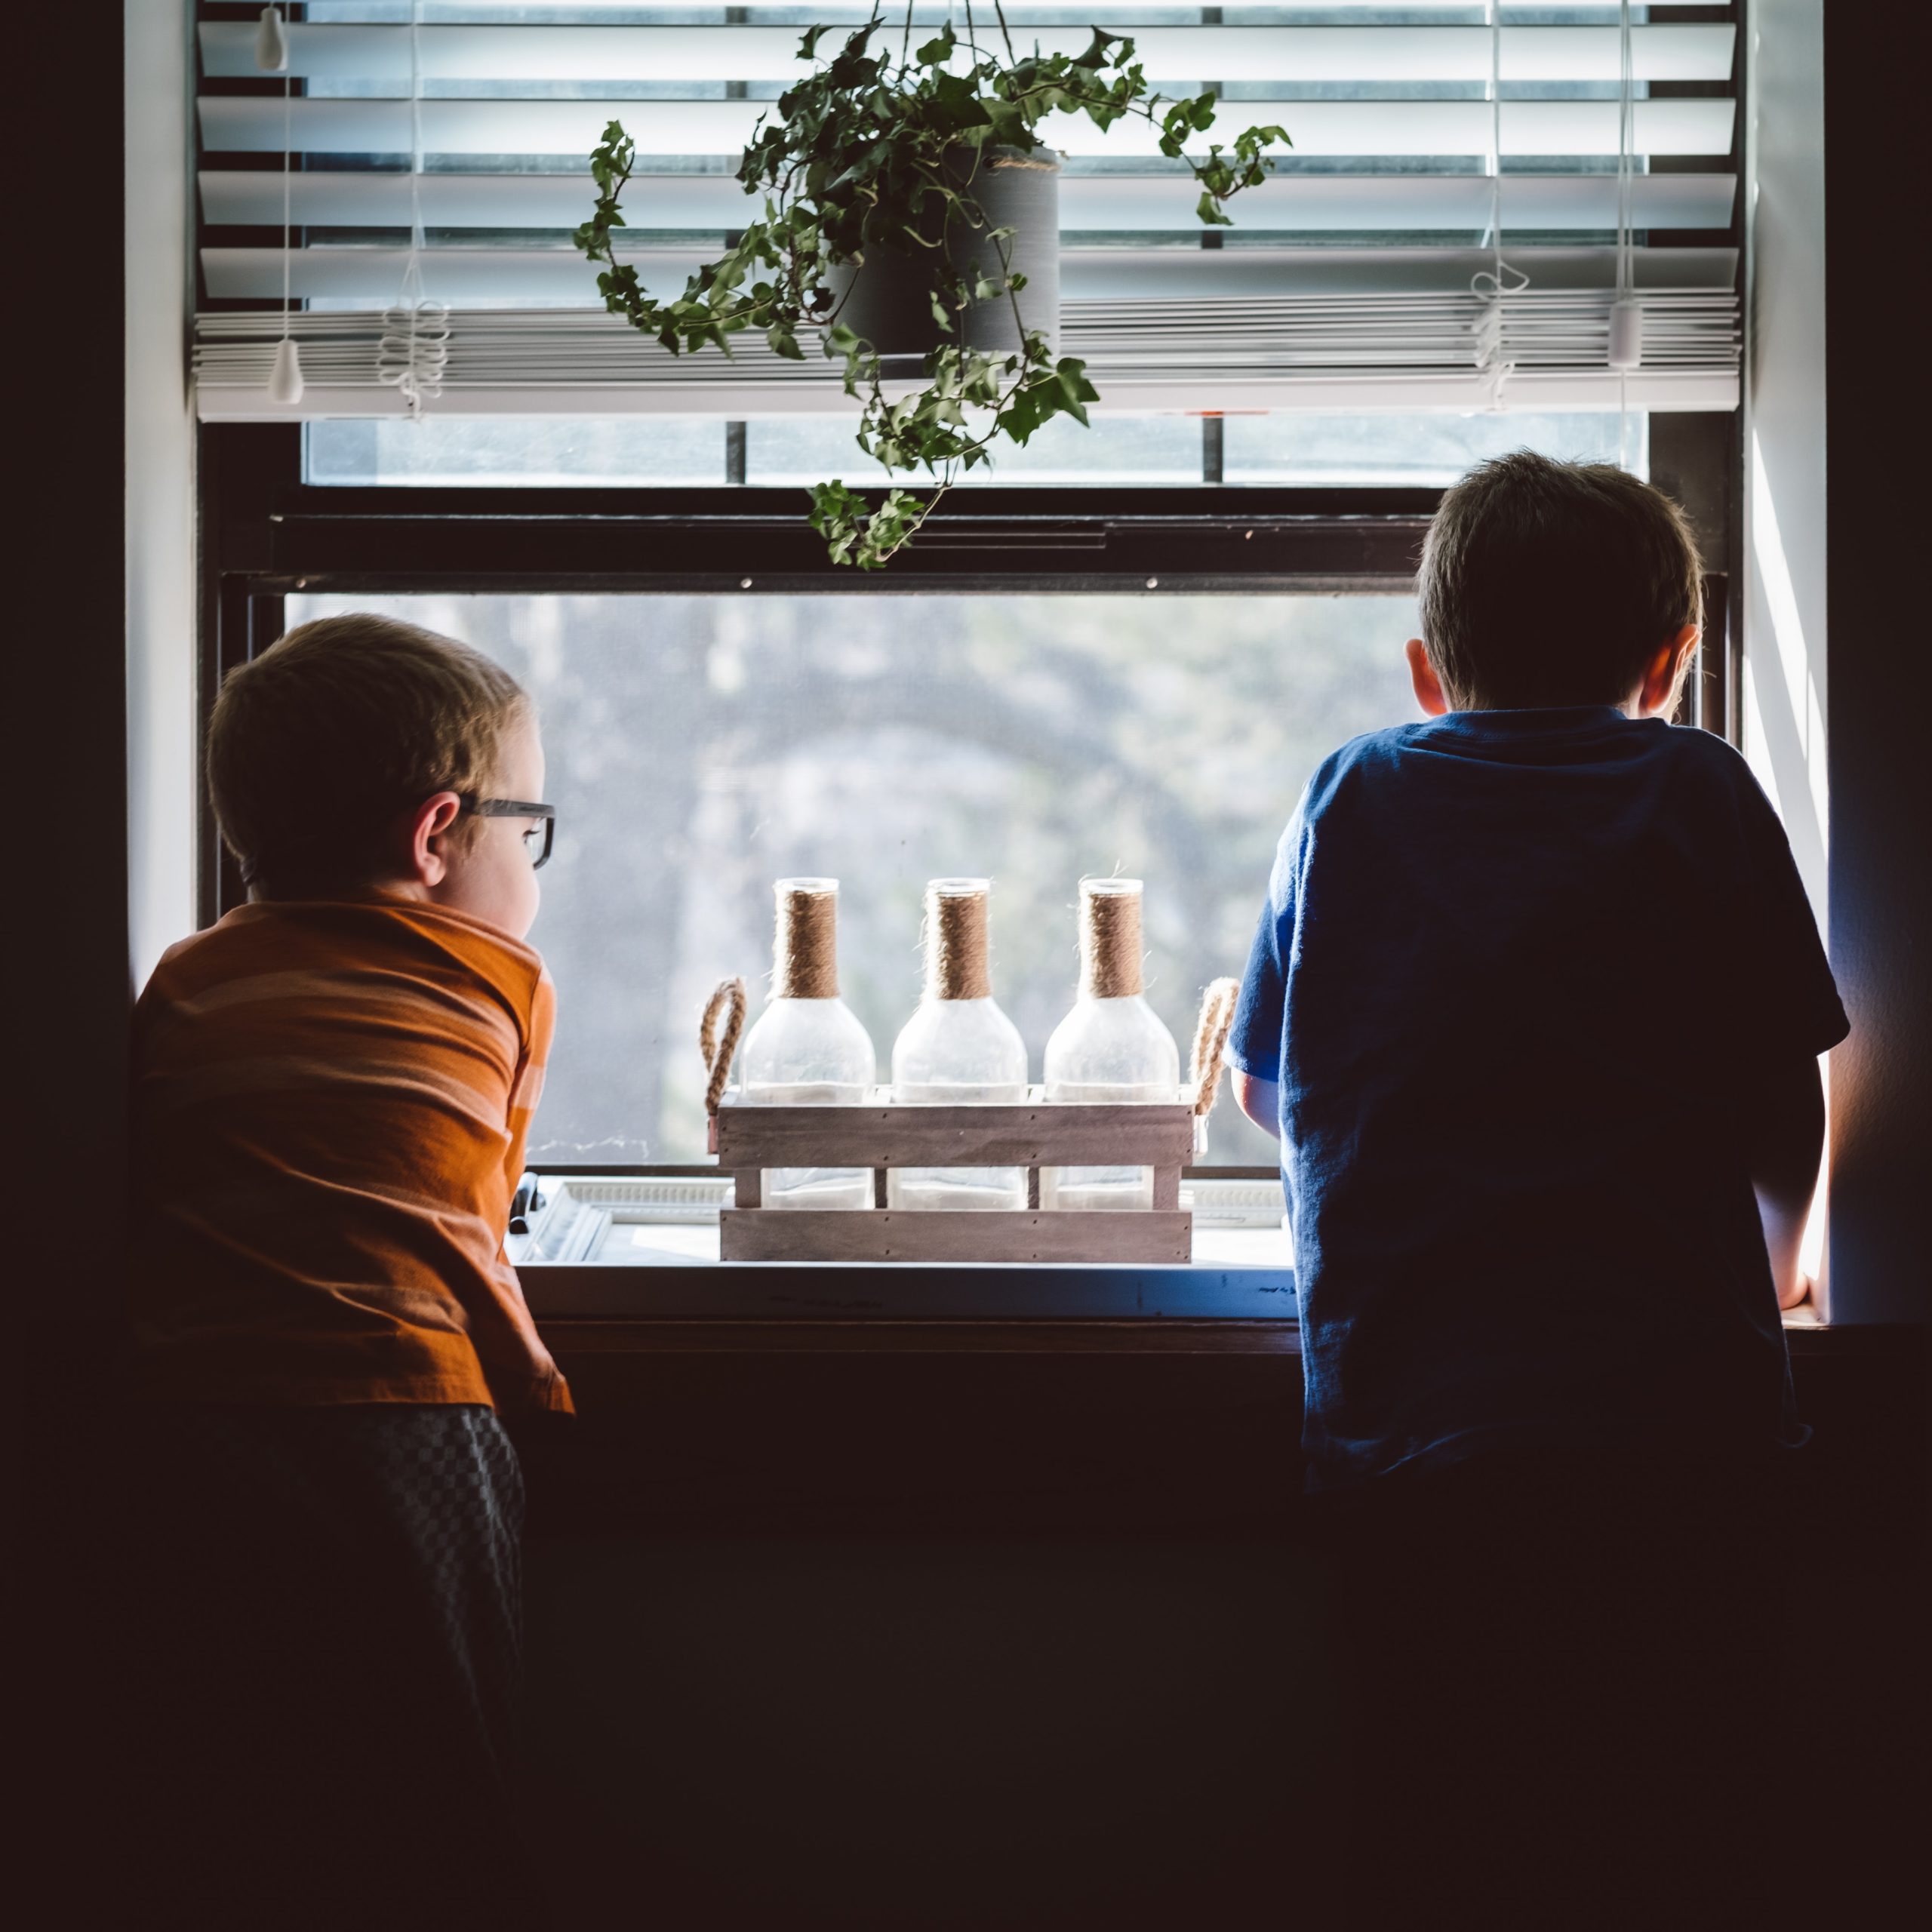 Two boys look out a window (Photo by Andrew Seaman on Unsplash)